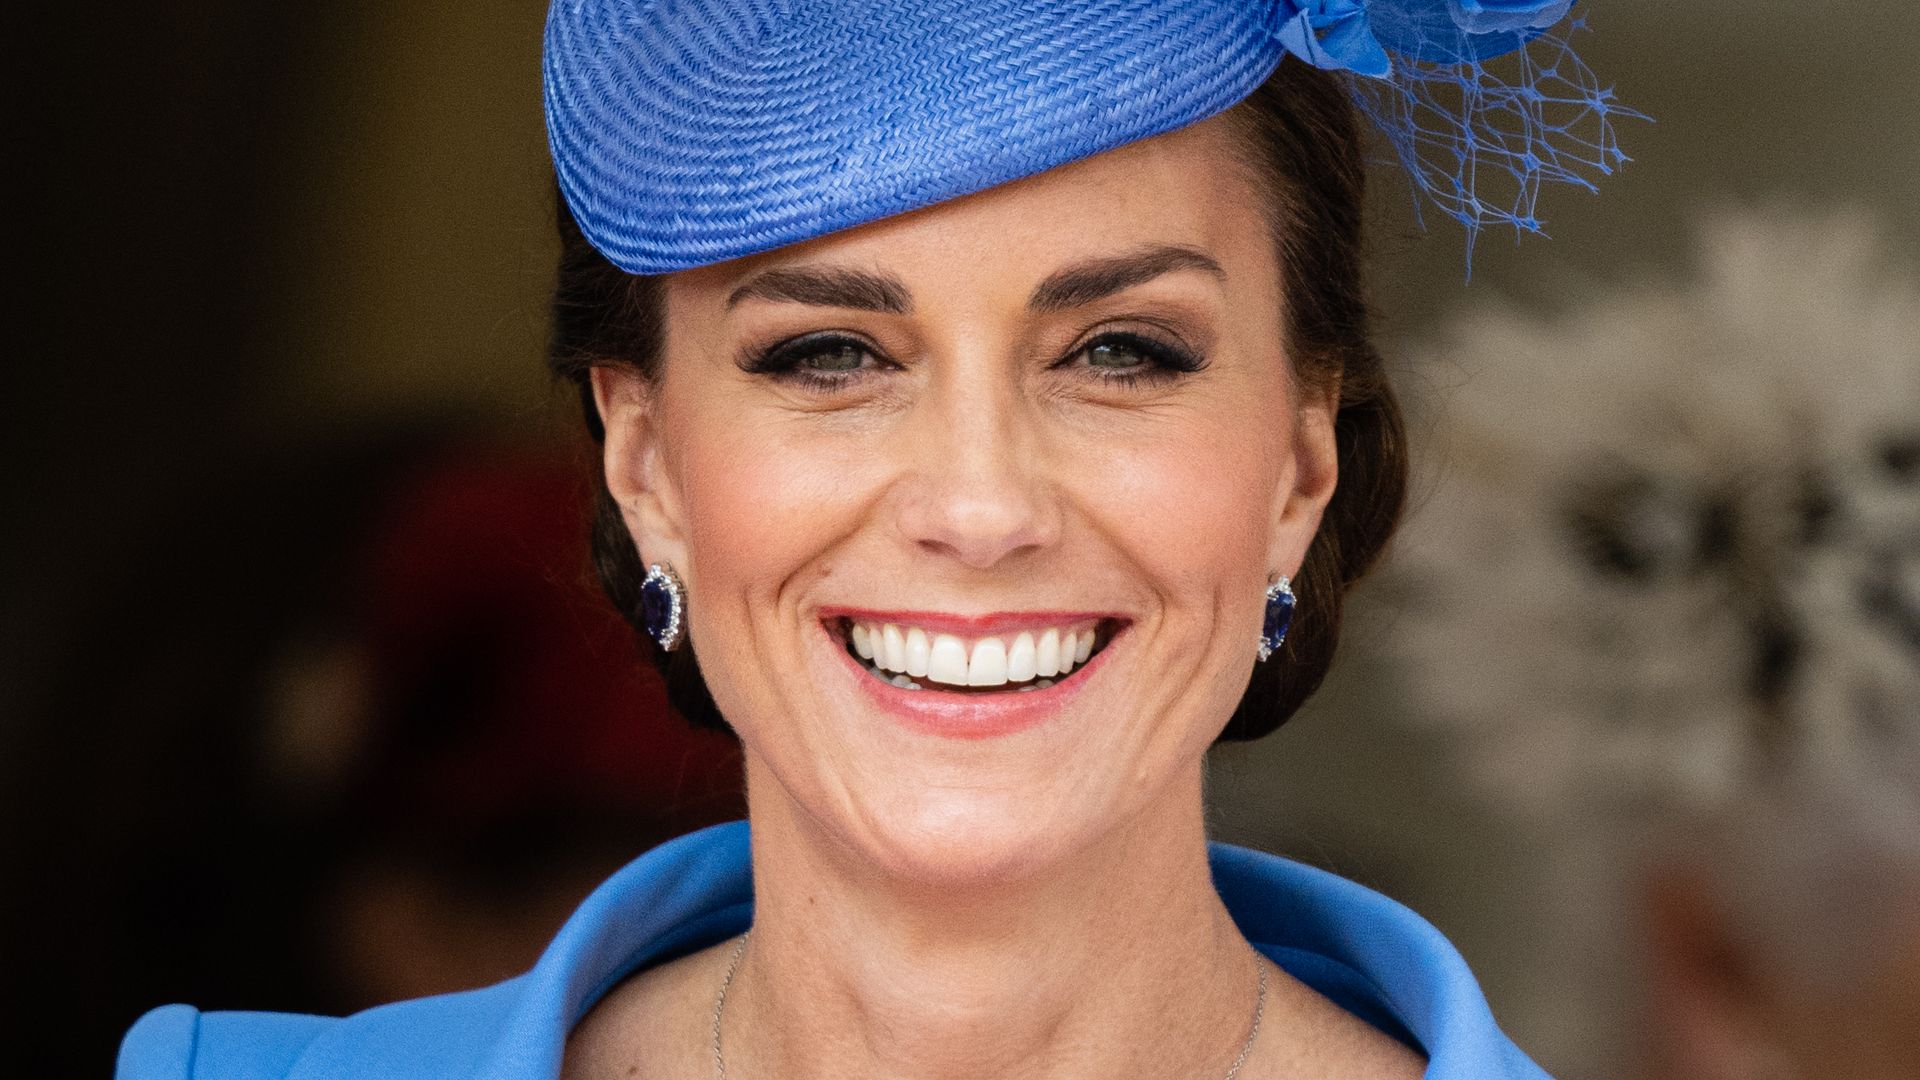 WINDSOR, ENGLAND - JUNE 13: Catherine, Duchess of Cambridge attends the Order Of The Garter Service at St George's Chapel on June 13, 2022 in Windsor, England. The Order of the Garter is the oldest and most senior Order of Chivalry in Britain, established